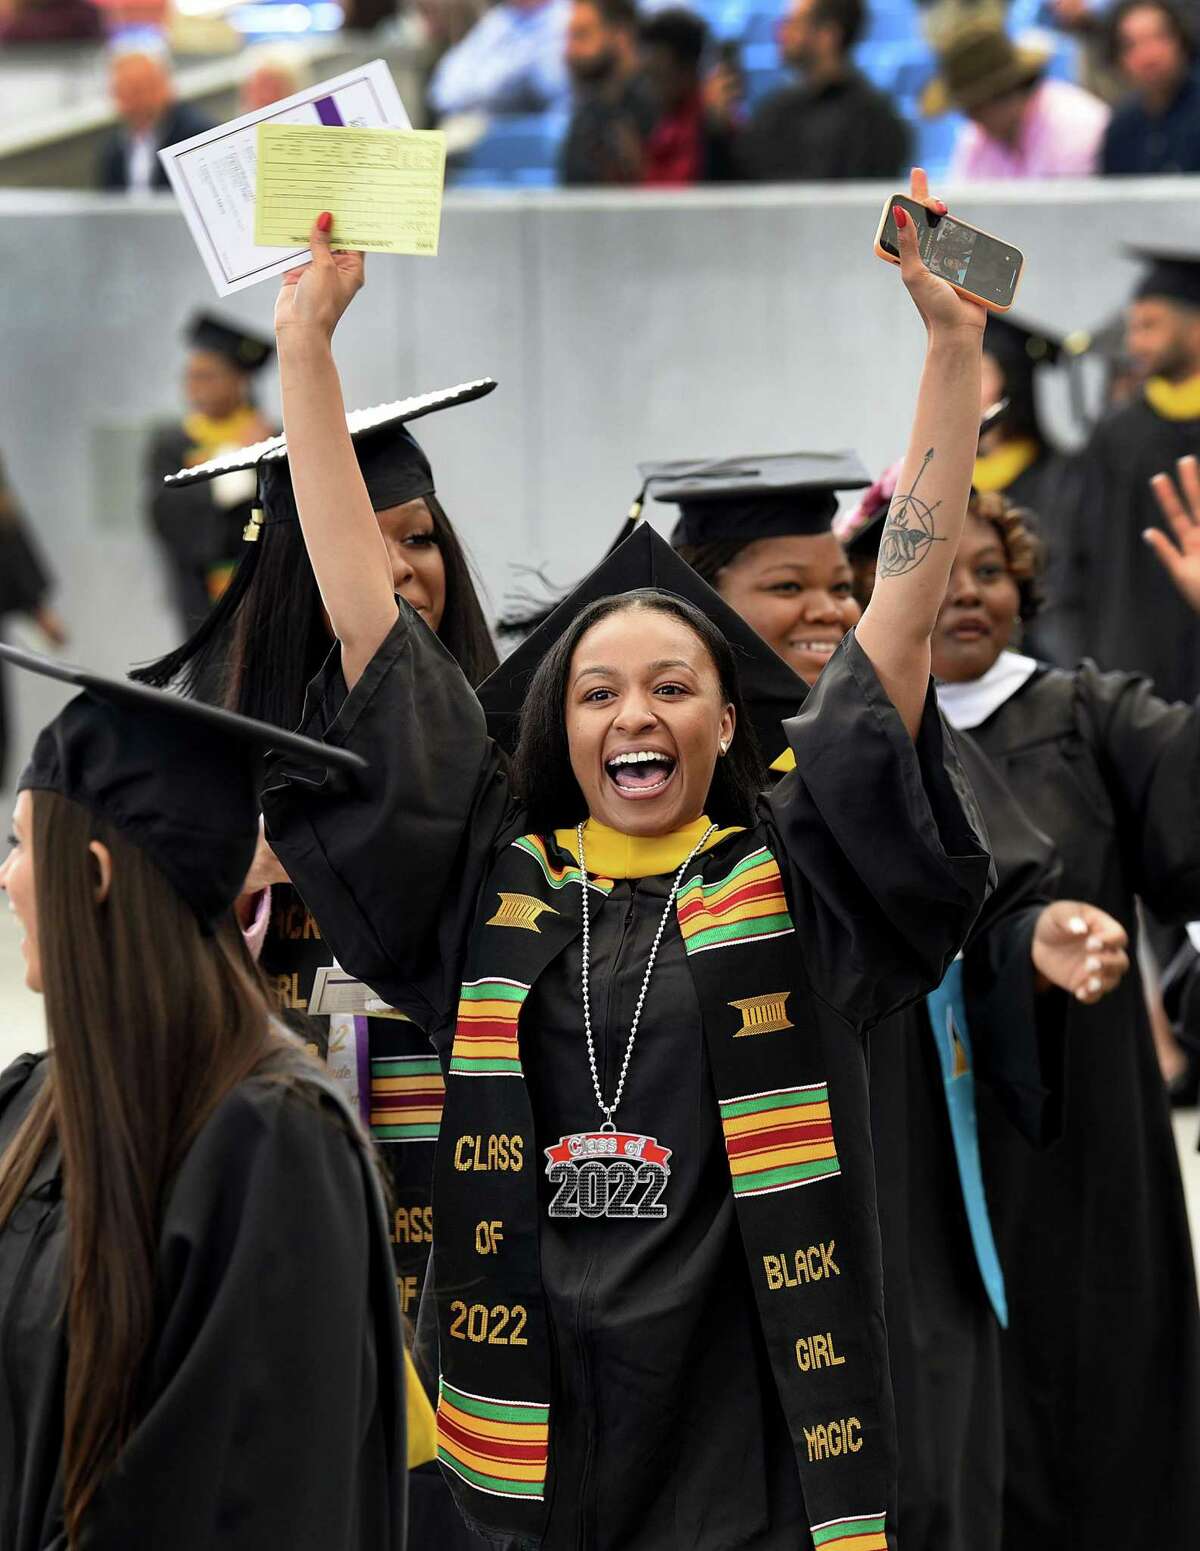 Jenayia Patterson of New Haven shows her enthusiasm during the processional at the start of graduation Sunday. The University of Bridgeport held its commencement ceremony for undergraduate students Sunday, May 1, 2022 at the Hartford HealthCare Amphitheater in Bridgeport.